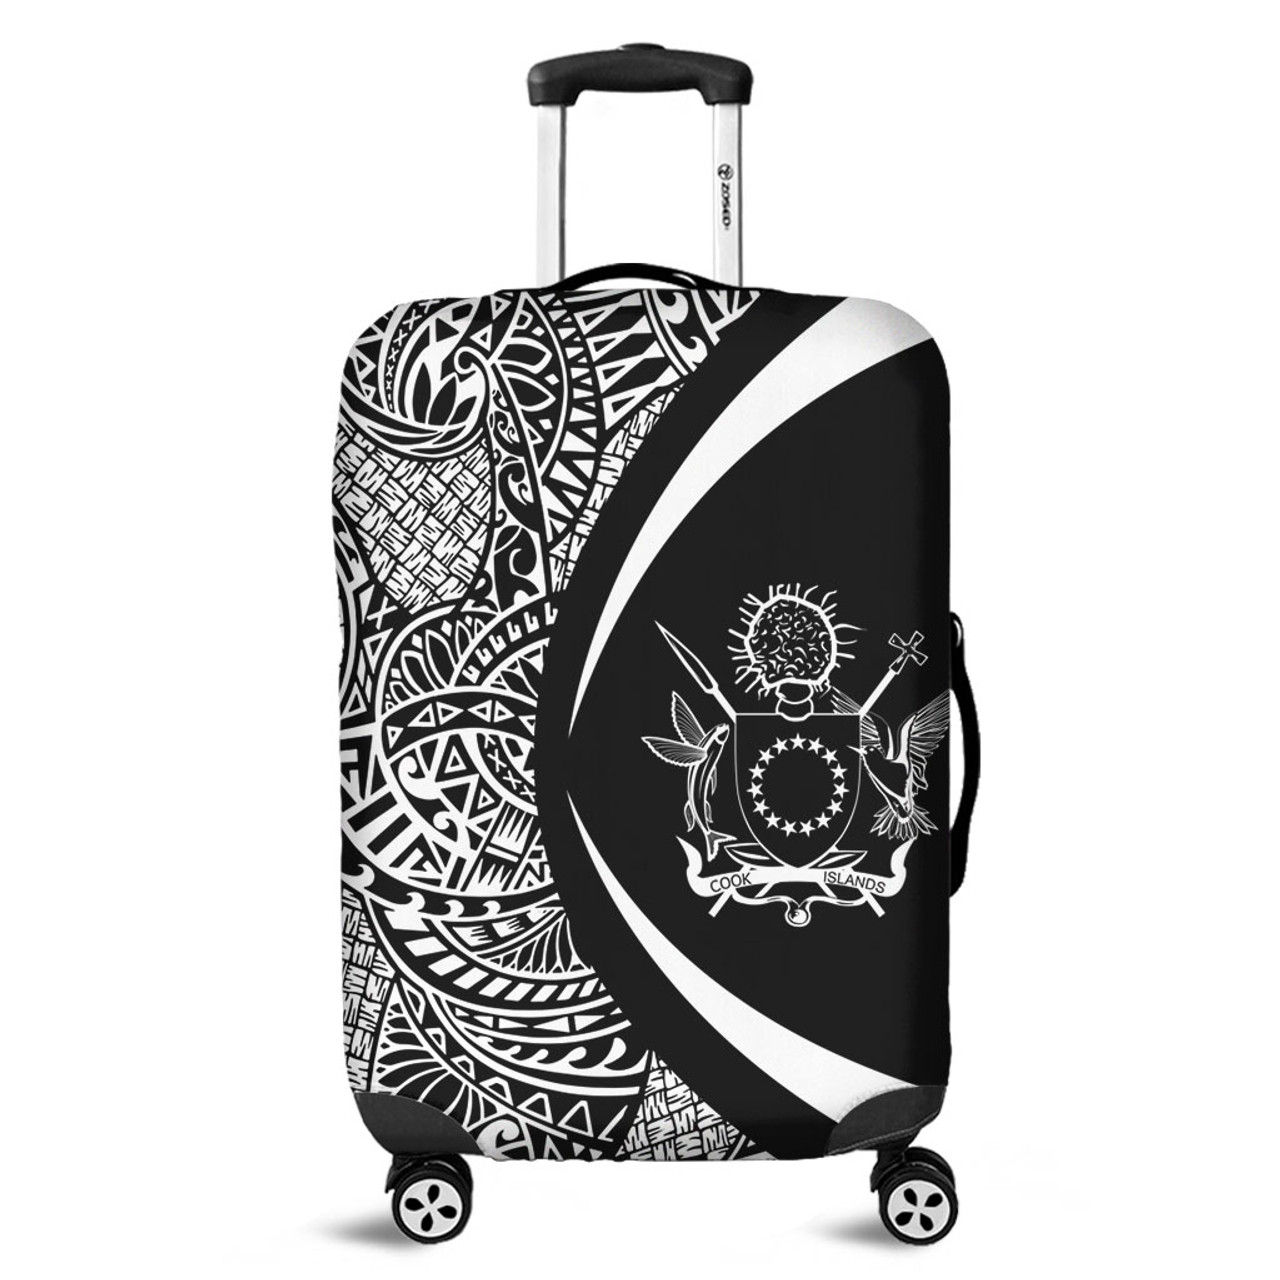 Cook Islands Luggage Cover Lauhala White Circle Style